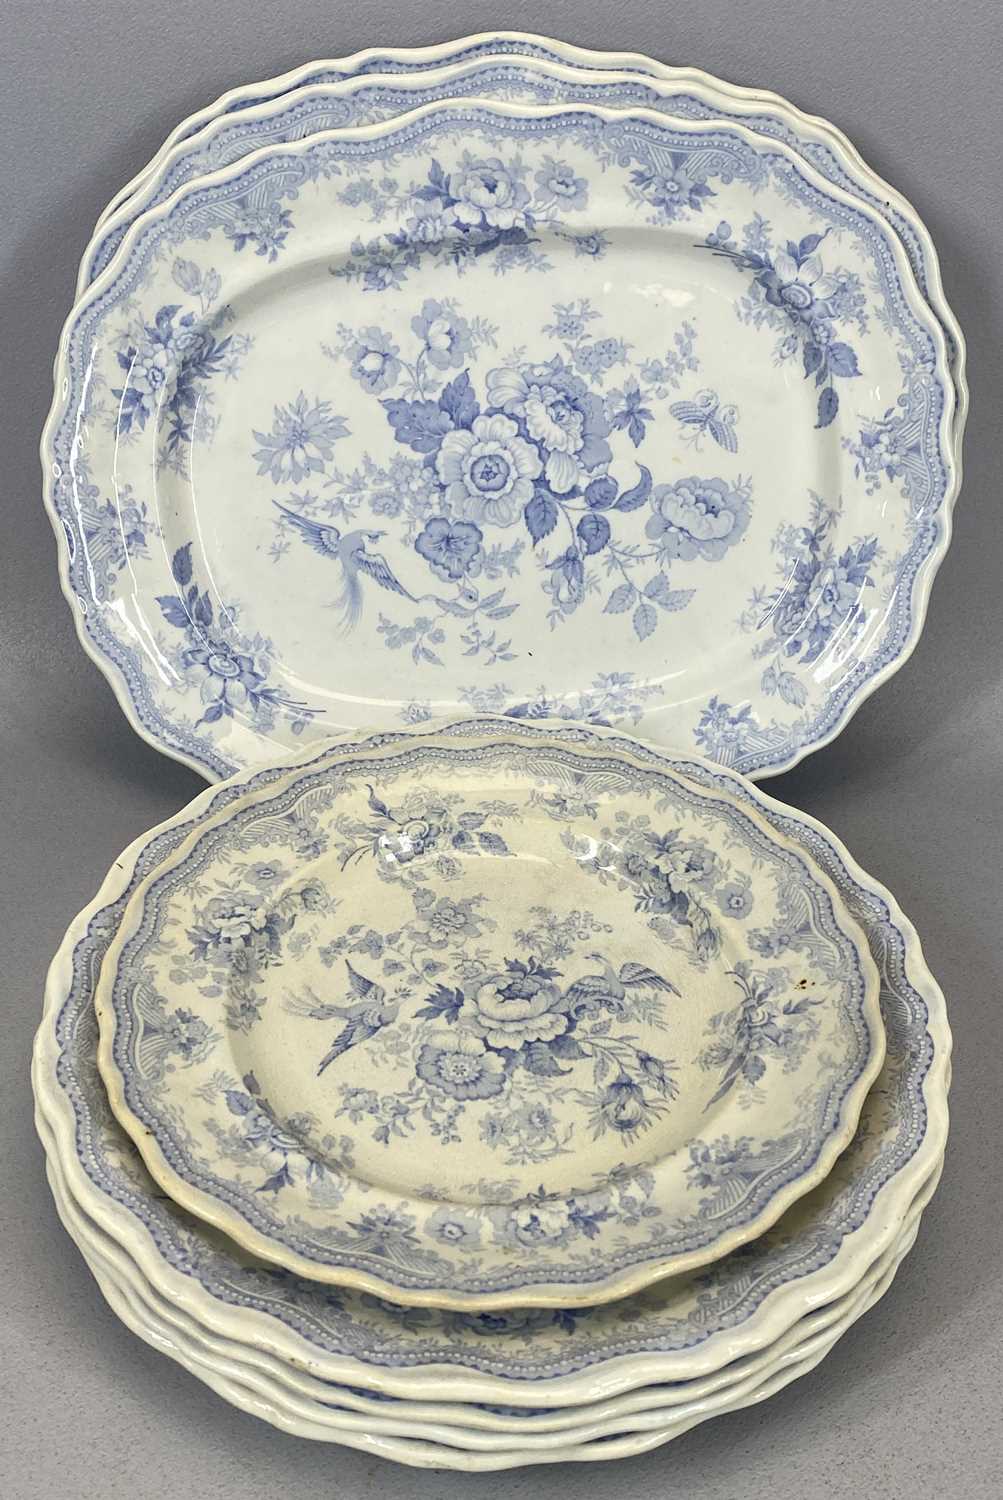 THREE STAFFORDSHIRE BLUE & WHITE TRANSFER DECORATED ASIATIC PHEASANT PATTERN OVAL PLATES, with 5 x - Image 6 of 6